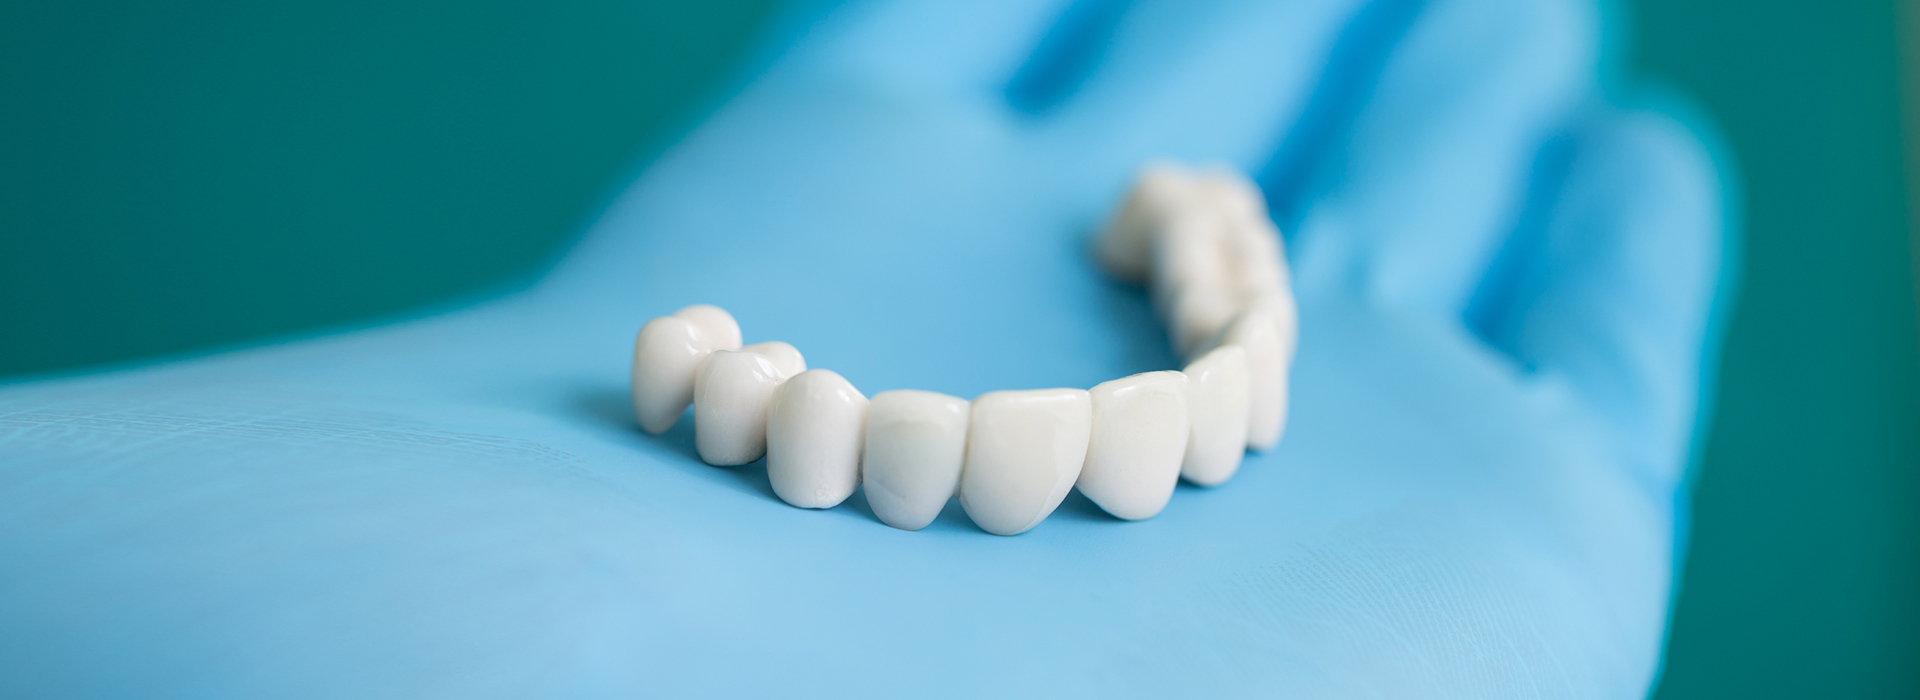 How to Take Care of Your Dental Crown?